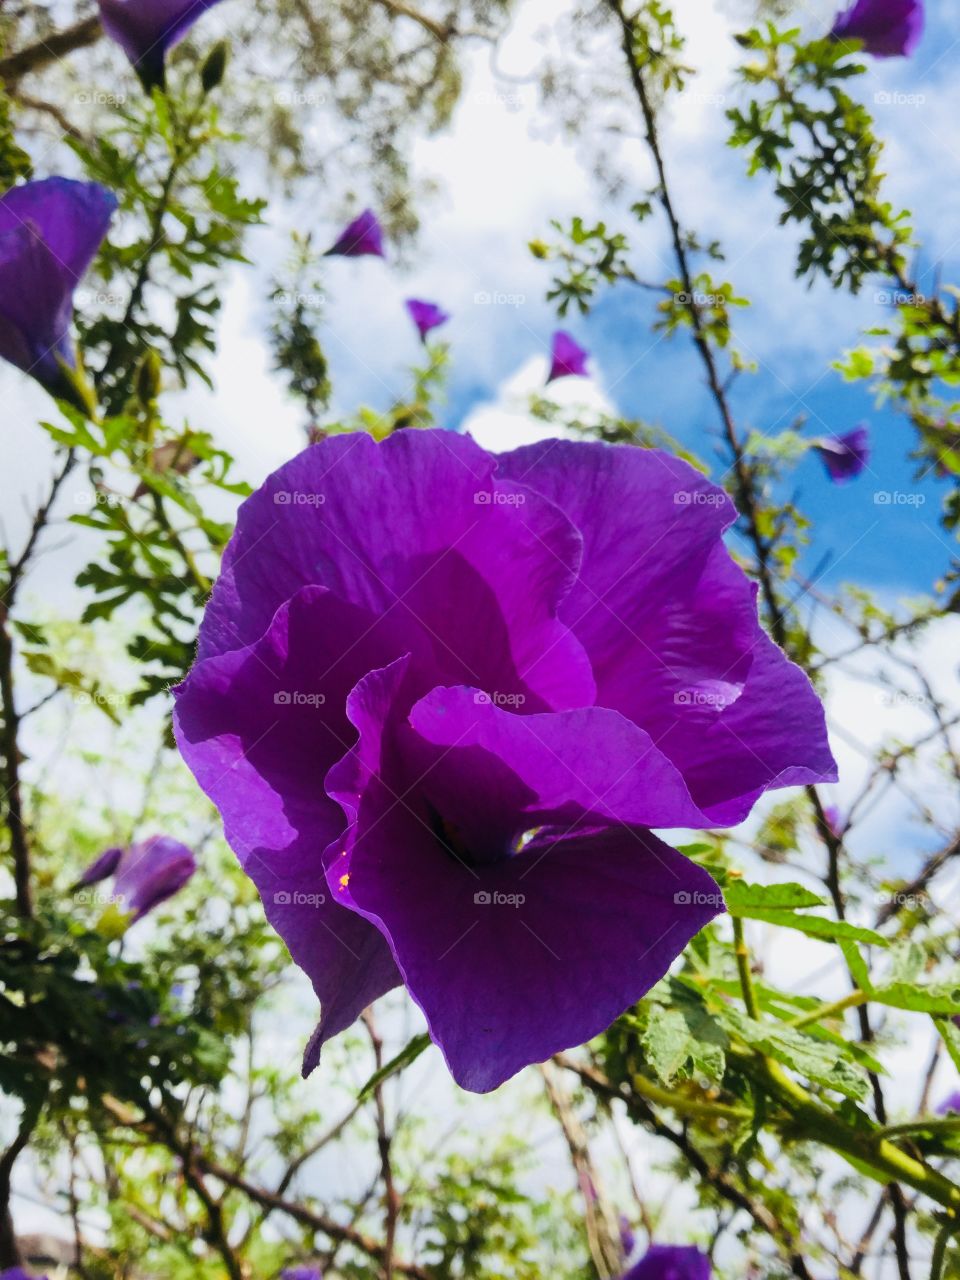 This shot is of a vibrant purple flower with green leaves. The sky and the clouds are the background.